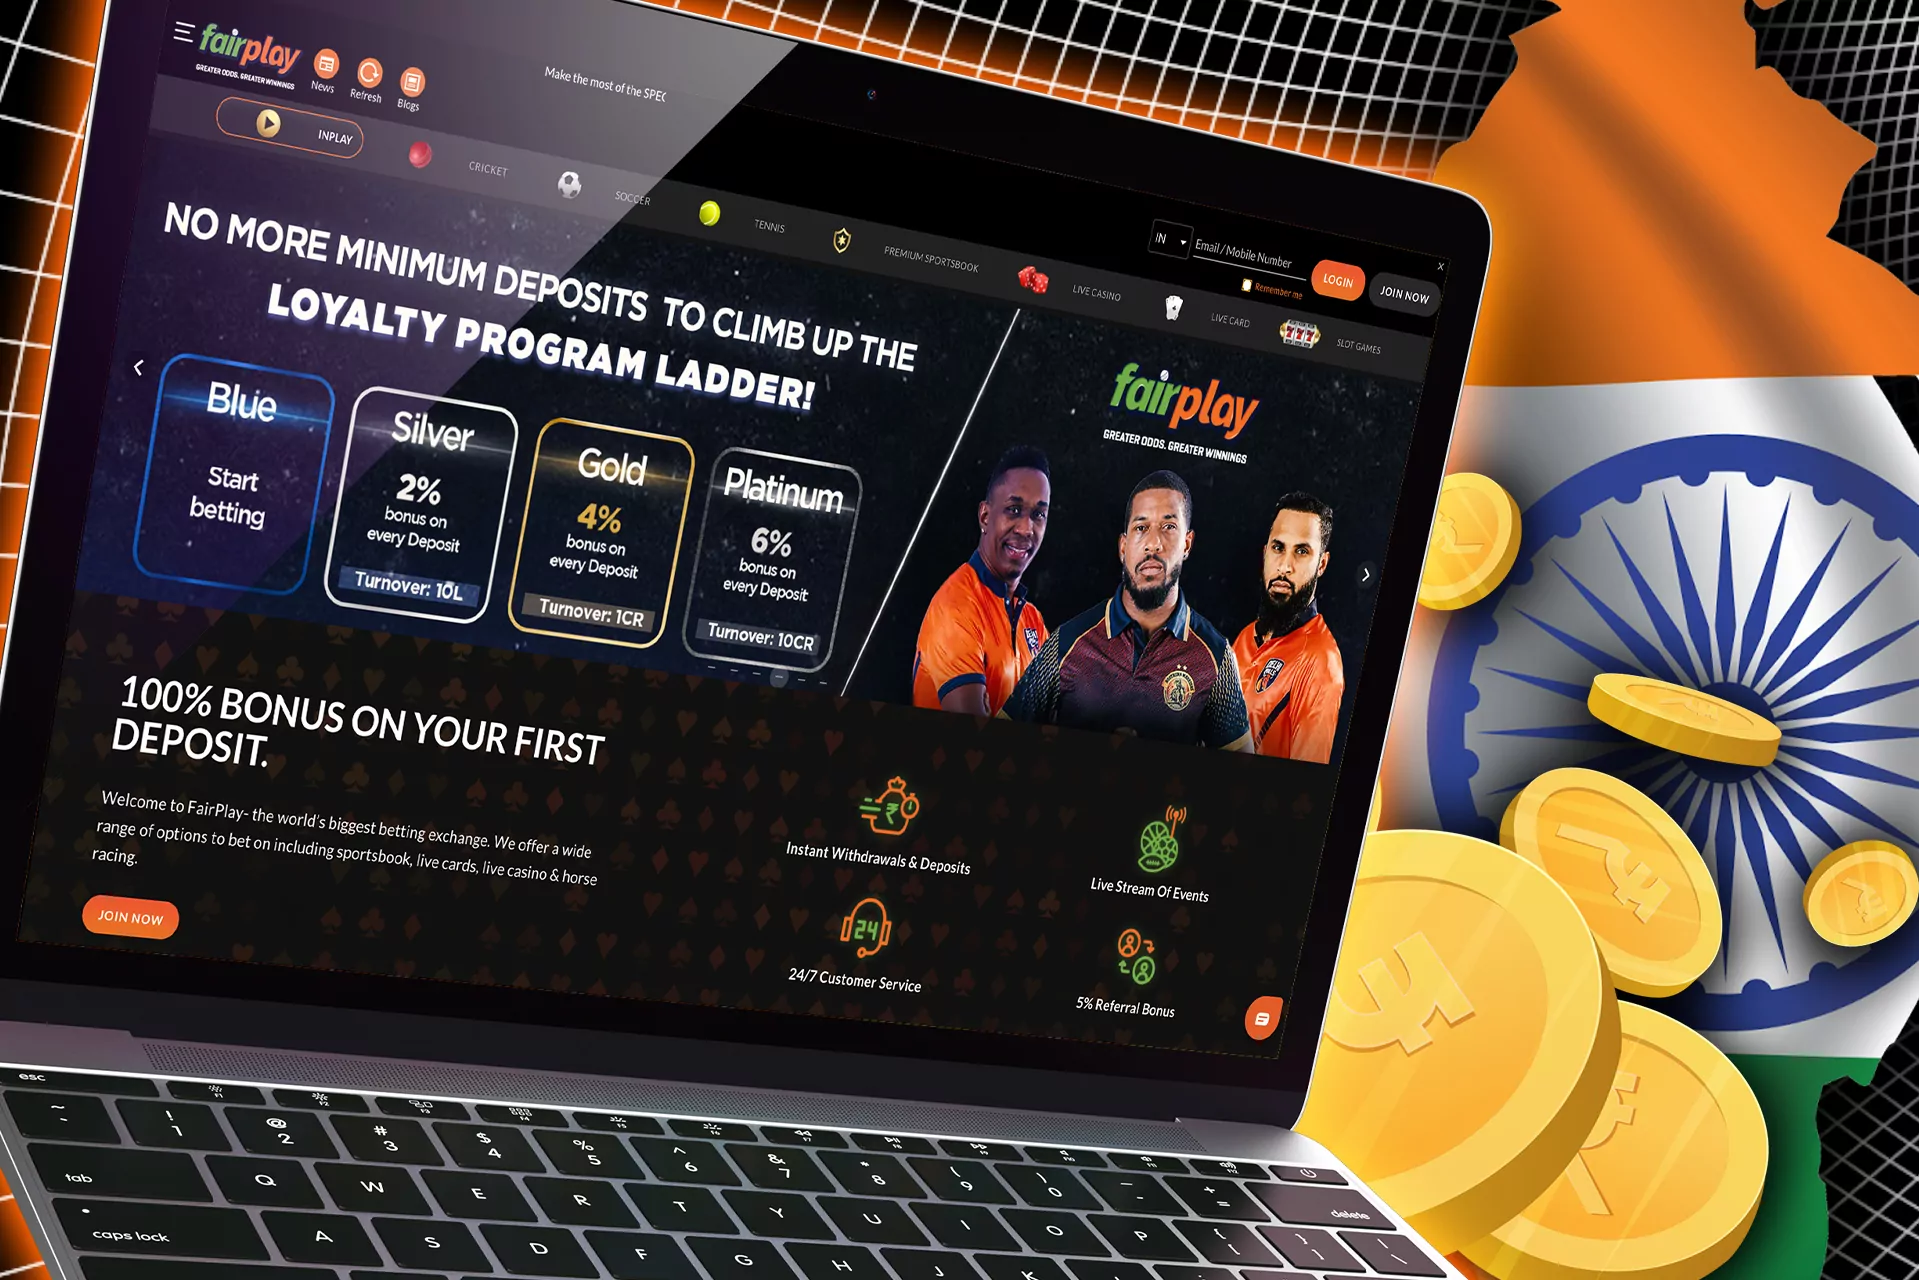 Fairplay is a legal online sportsbook in India.